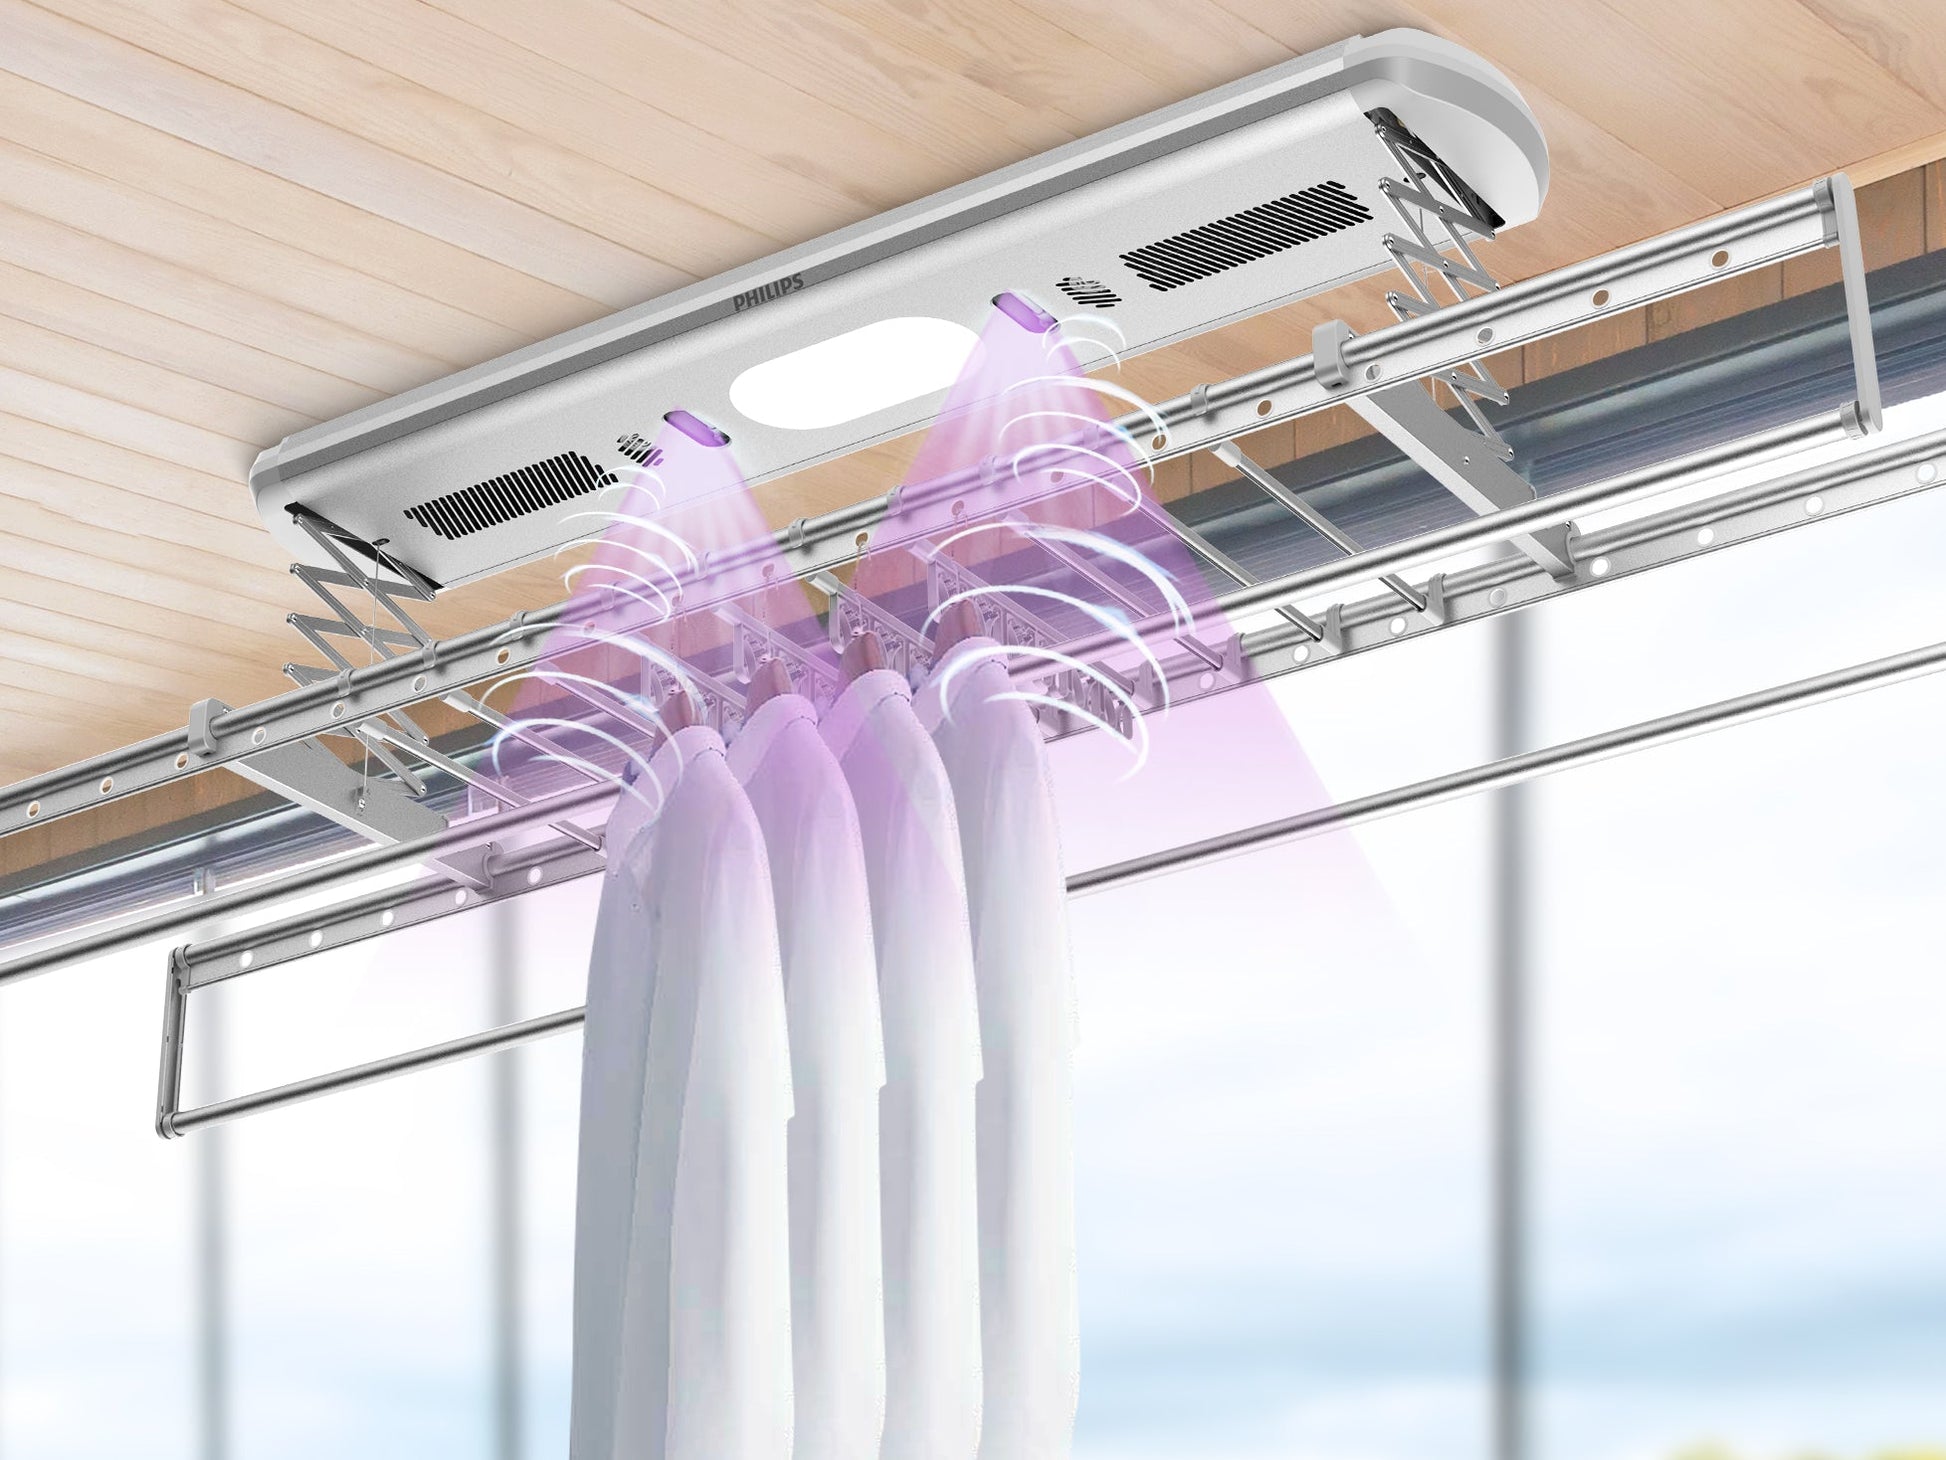 Philips Smart Clothes Drying Rack